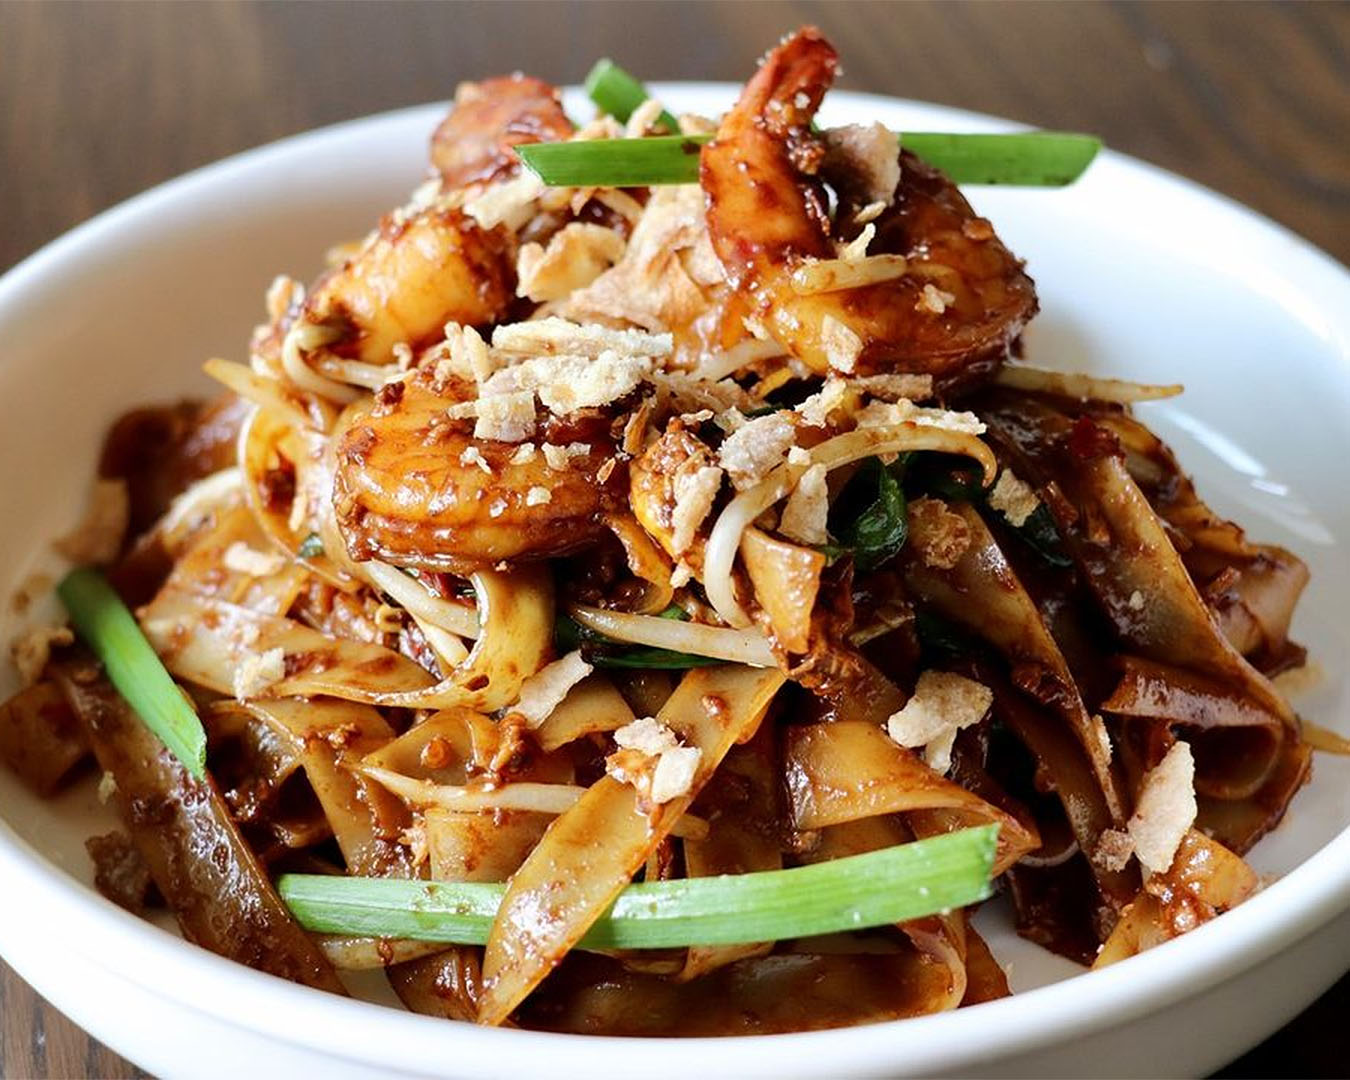 Char Kway Teow - fried noodles with prawns & Chinese sausage at Madam Woo, one of the best restaurants in Takapuna.